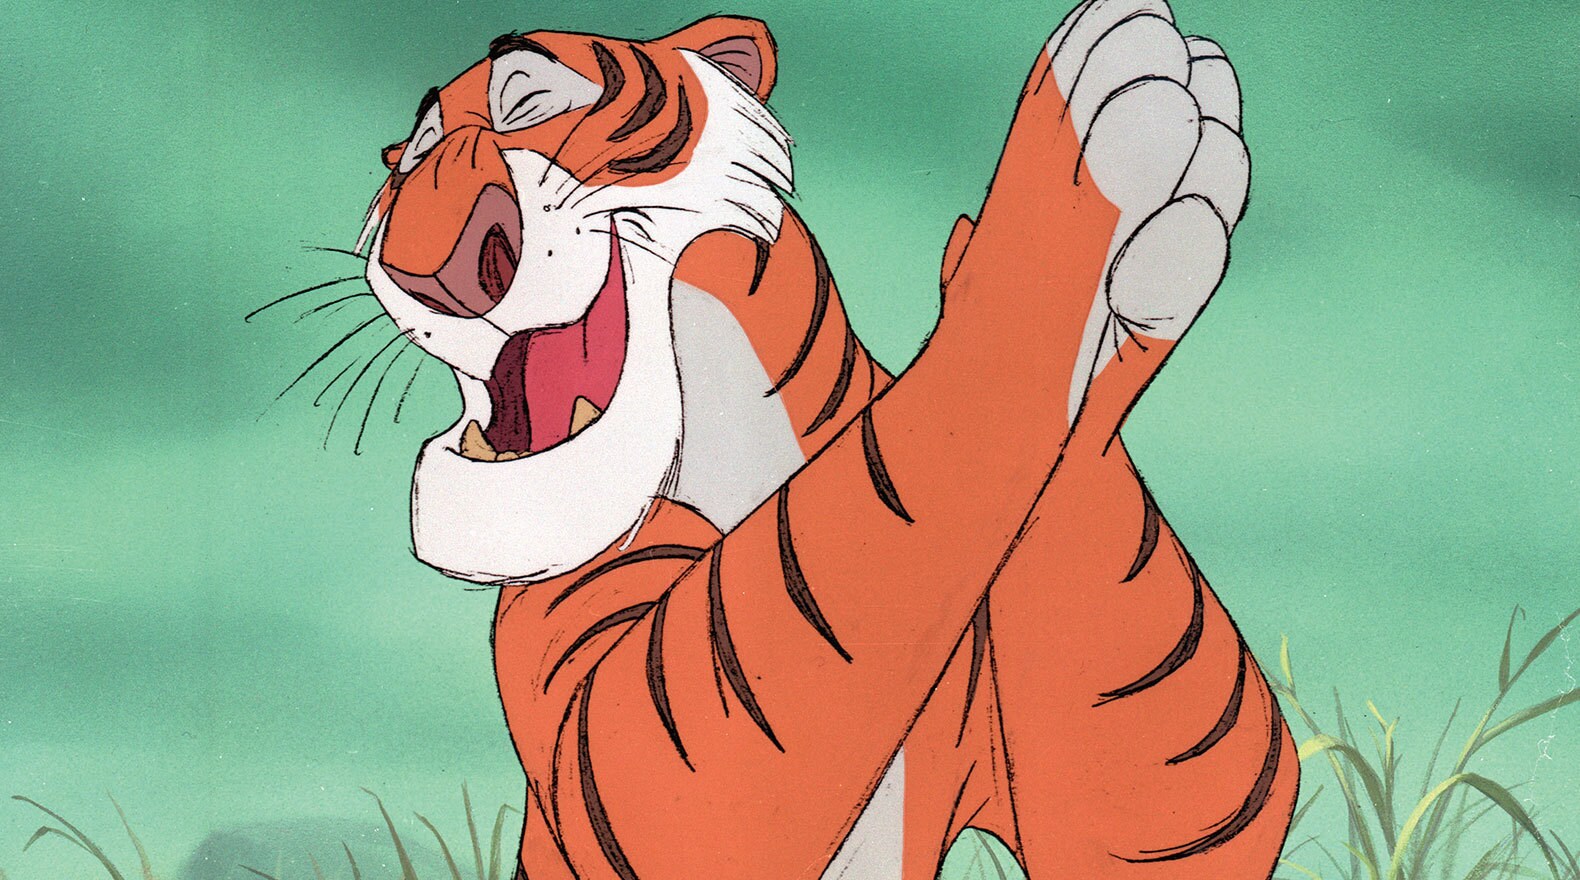 "Now, I'm going to close my eyes and count to ten. It makes the chase more interesting... for me." Shere Khan (voice of George Sanders) from the Disney movie The Jungle Book (1967).